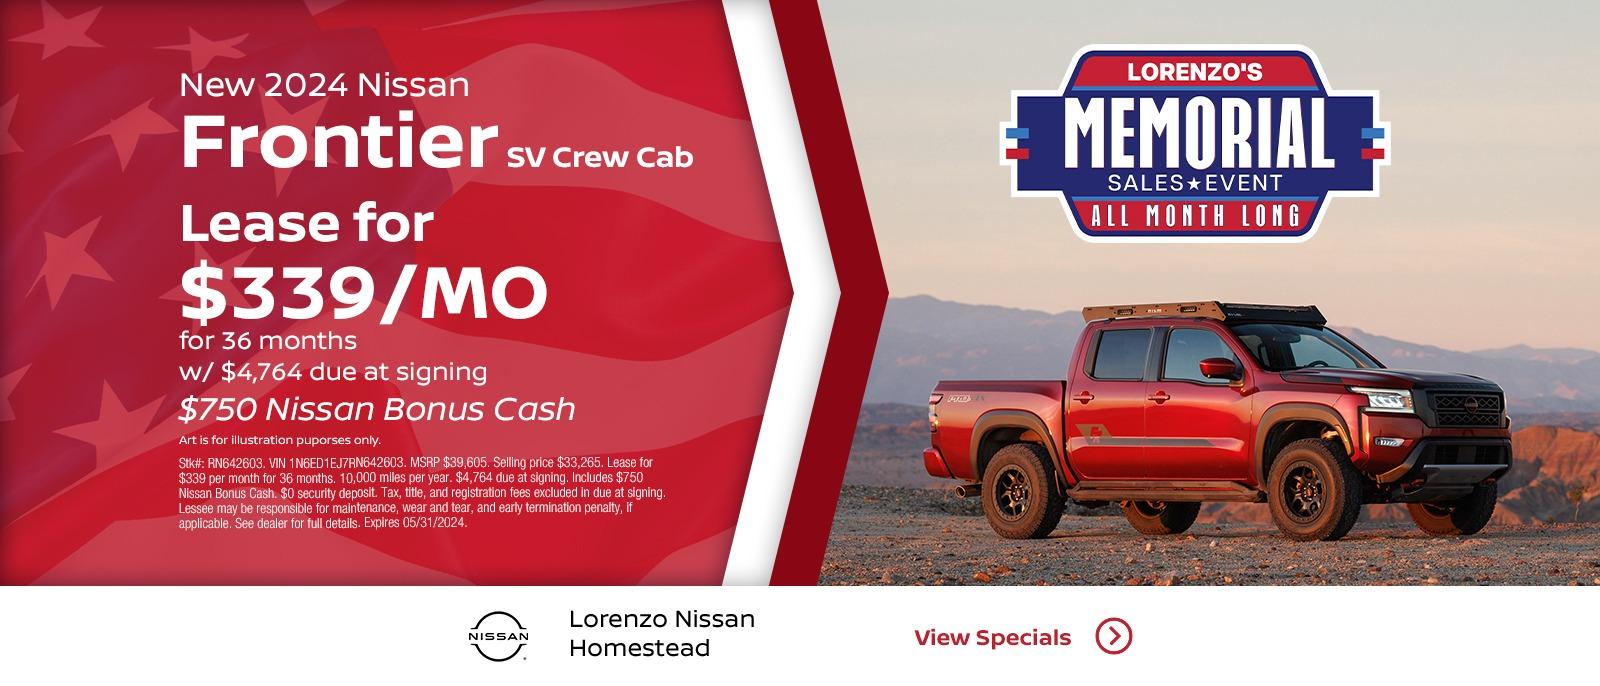 2024 Nissan FRONTIER SV CREW CAB
STOCK #RN642603
MSRP: $39,605
SELLING PRICE: $33,265
Lease for $339 + tax per month
36 months | 10000 miles | $4764 down payment
$750 BONUS CASH